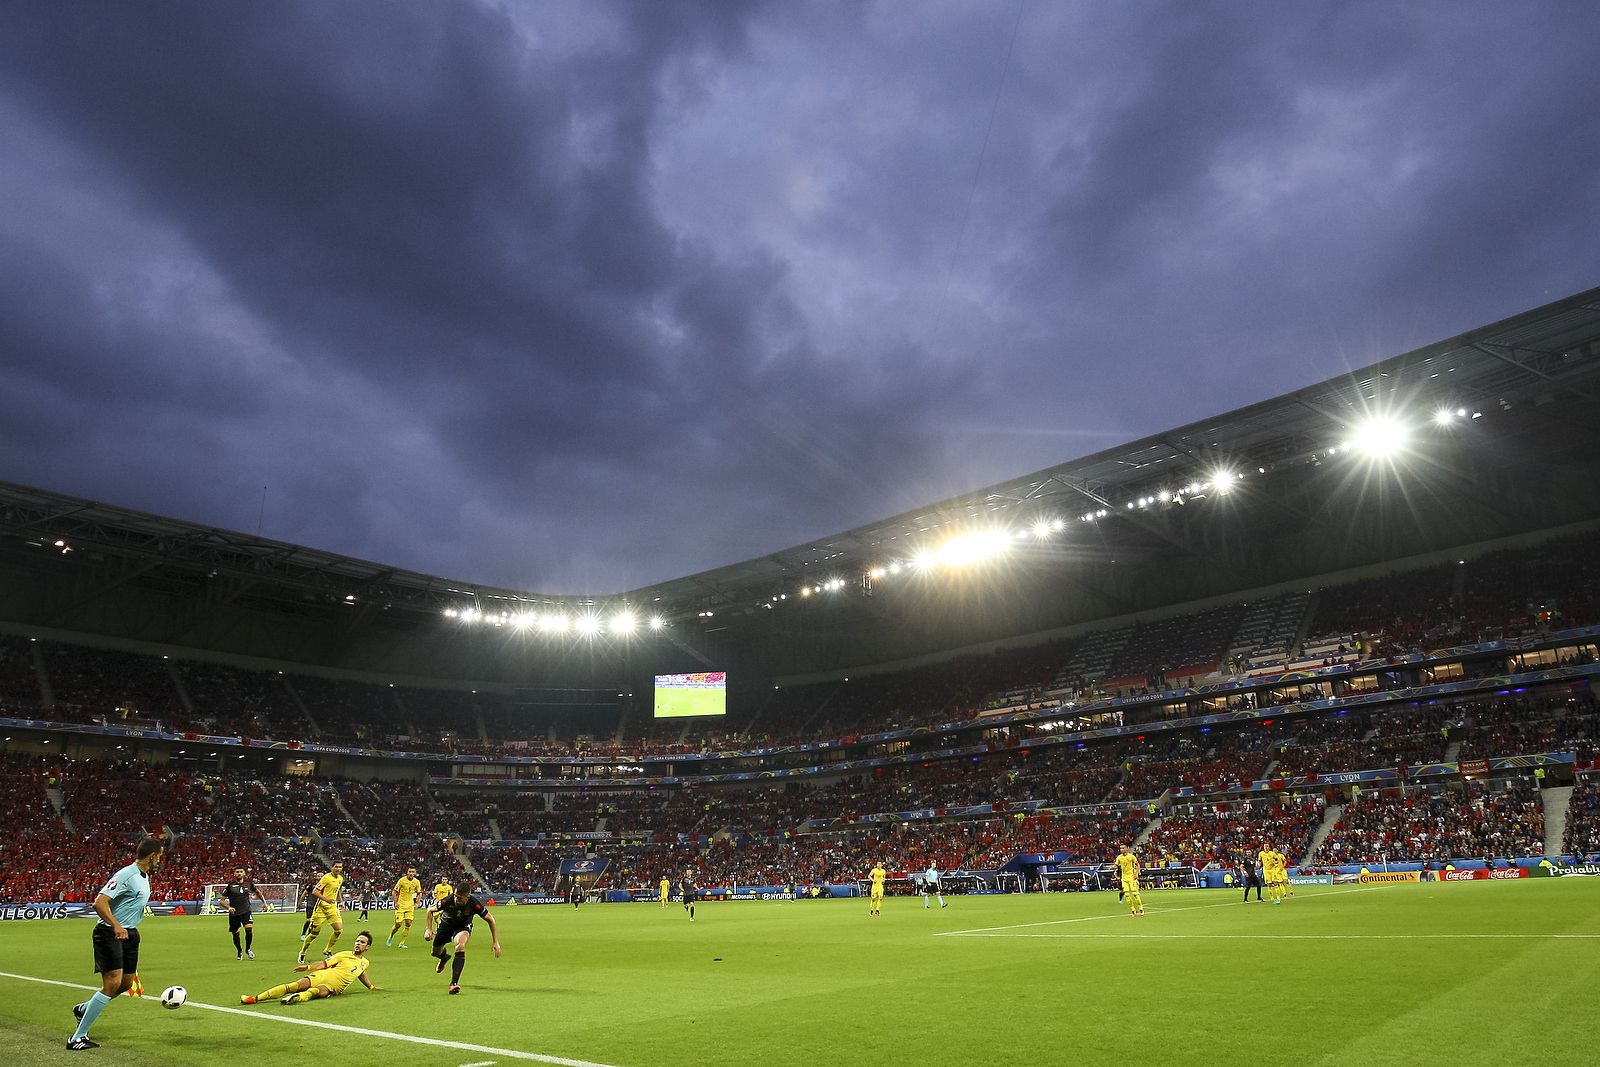 A general view of Parc Olympique Lyonnais during the match